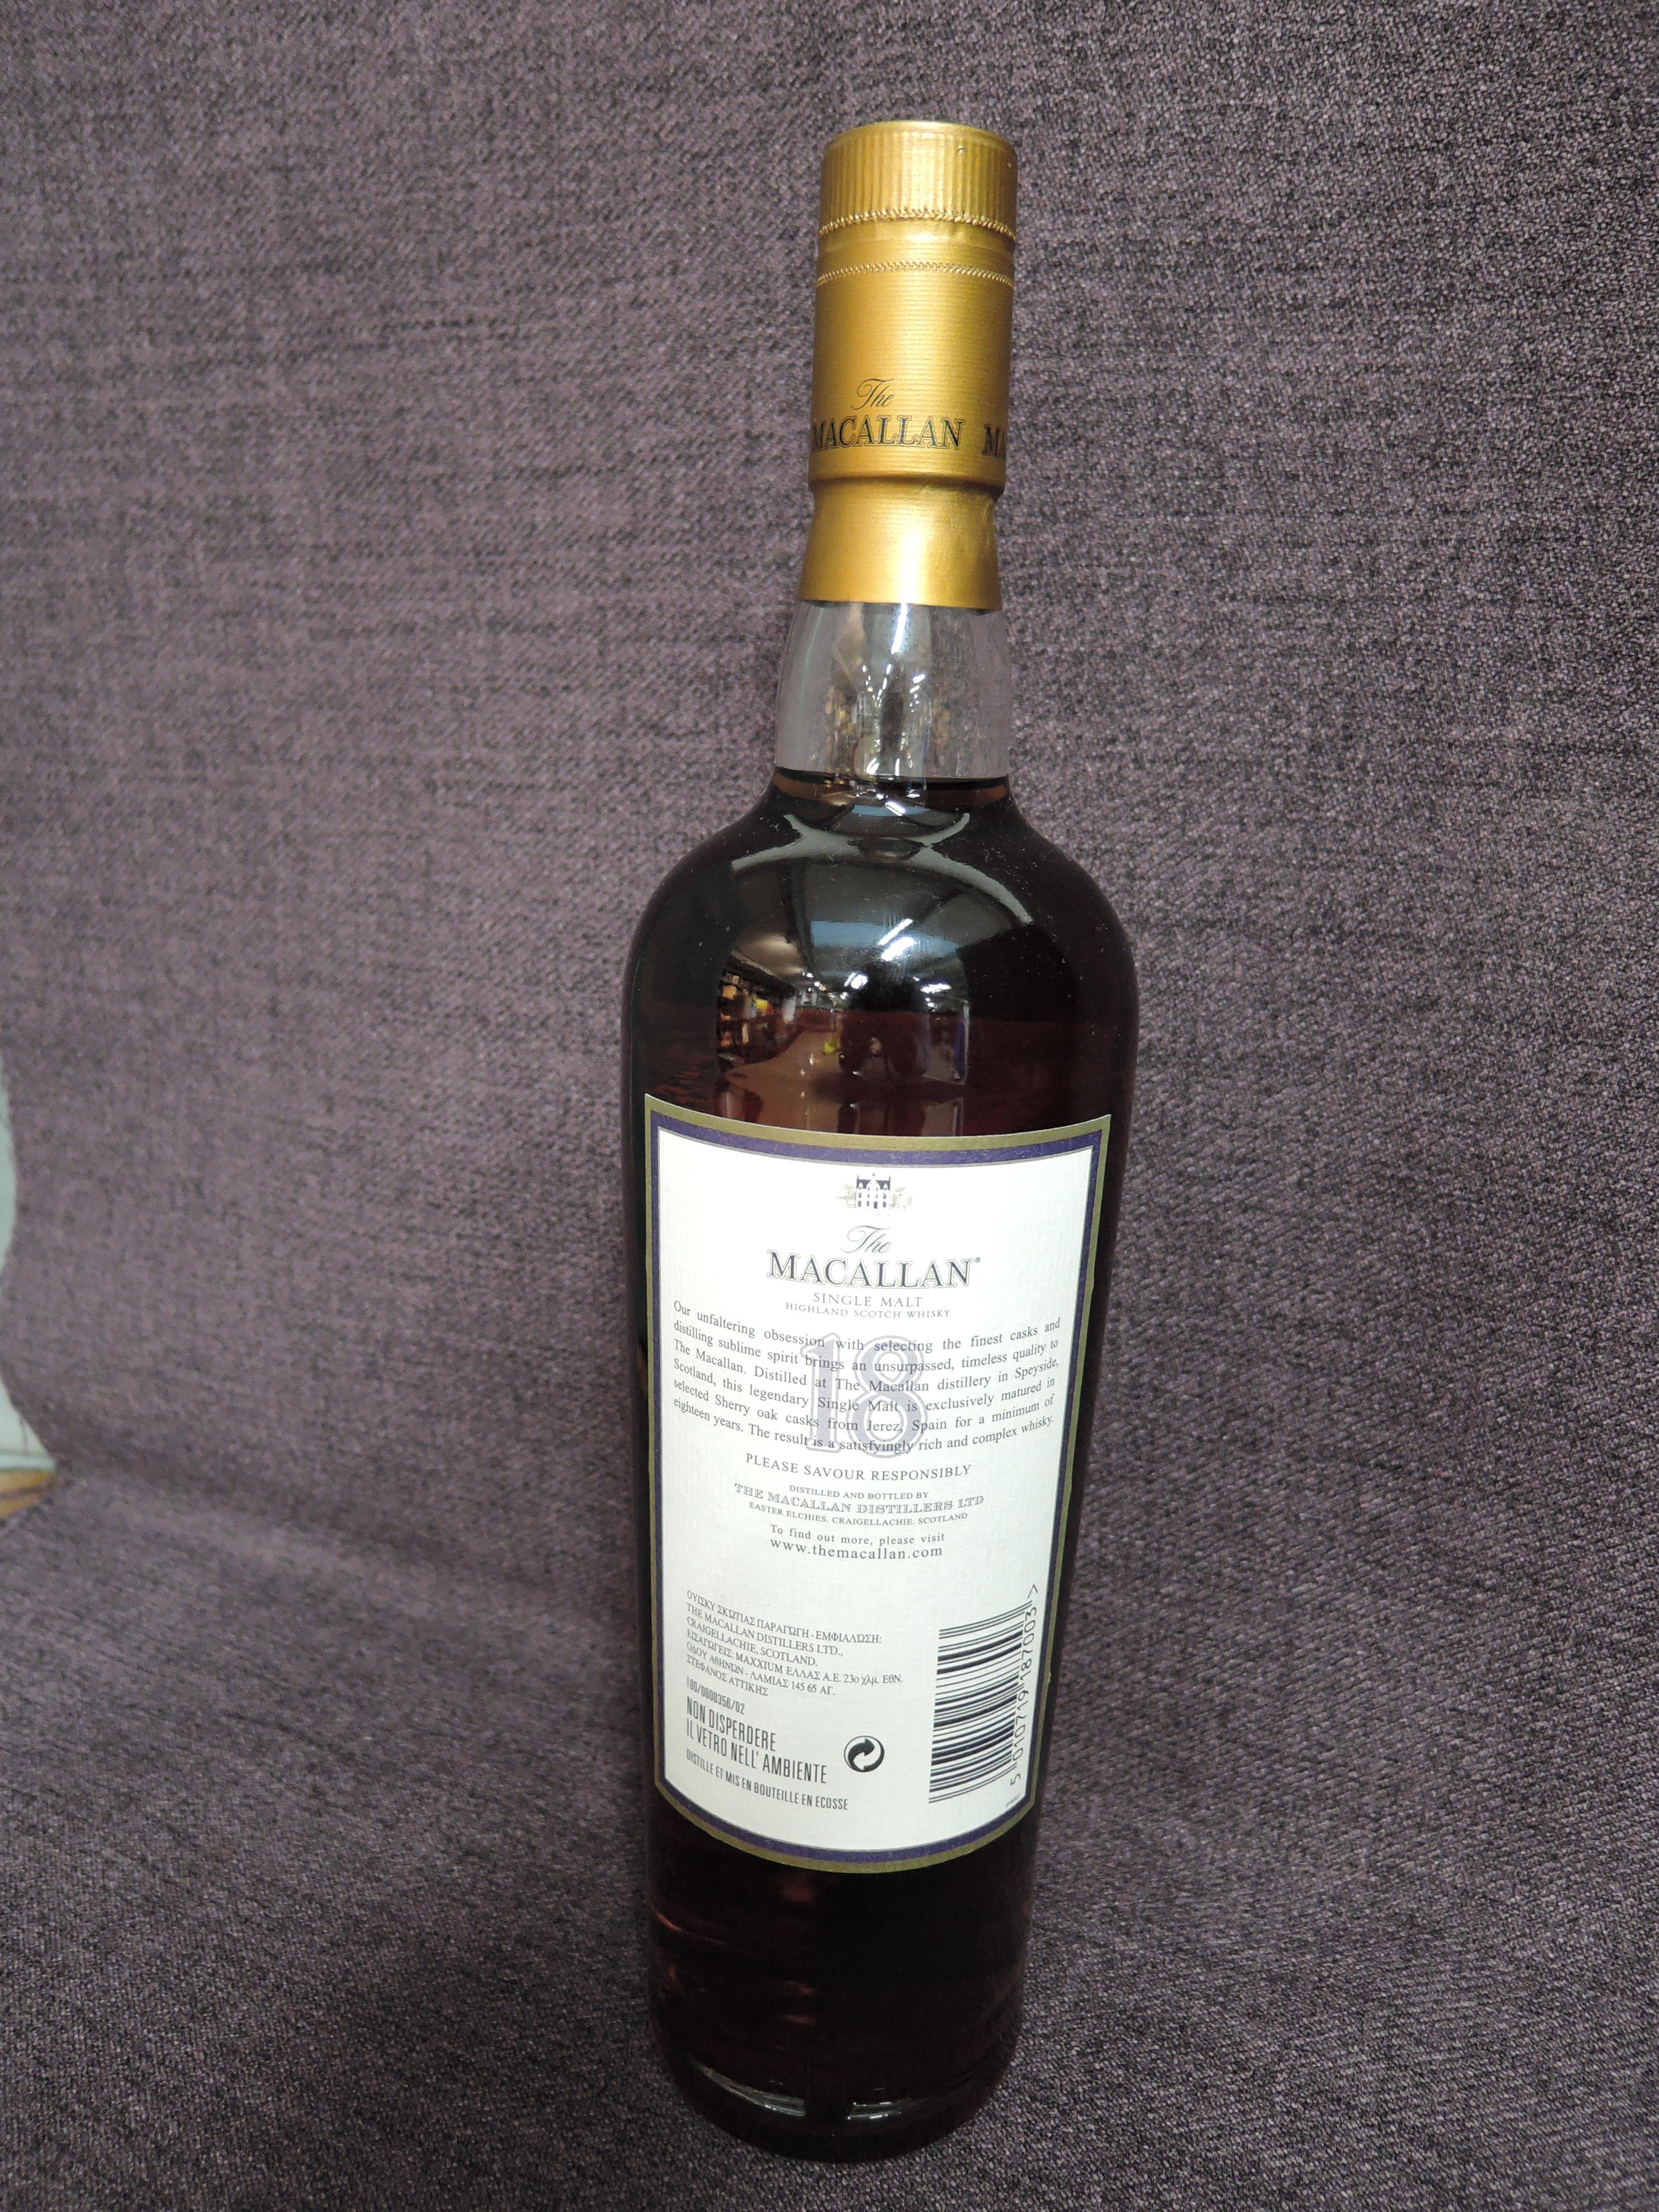 A bottle of Single Malt Whisky, The Macallan 18 Year Old Exclusively Matured in Selected Sherry - Image 2 of 2